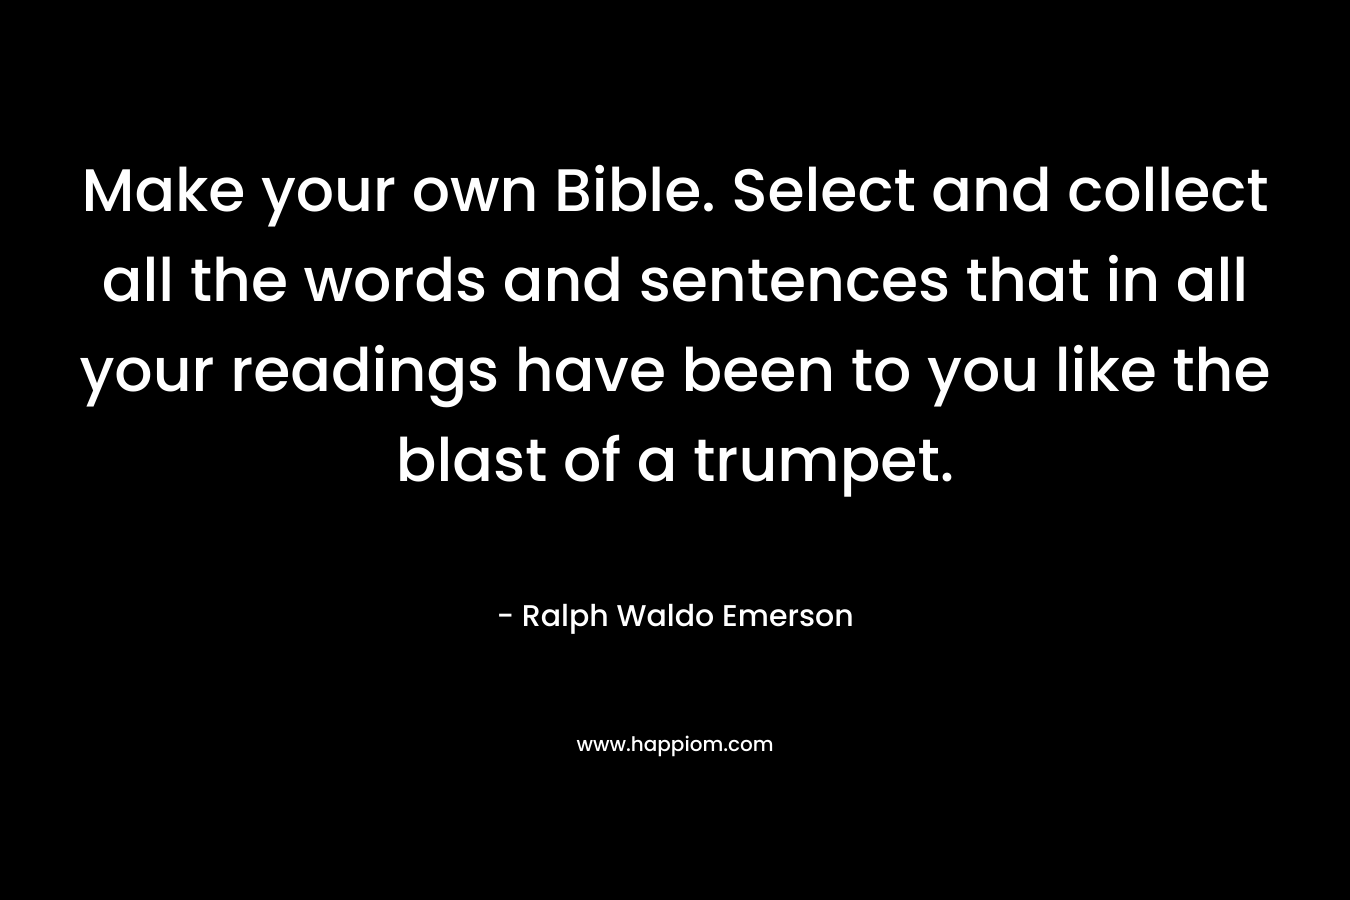 Make your own Bible. Select and collect all the words and sentences that in all your readings have been to you like the blast of a trumpet. – Ralph Waldo Emerson